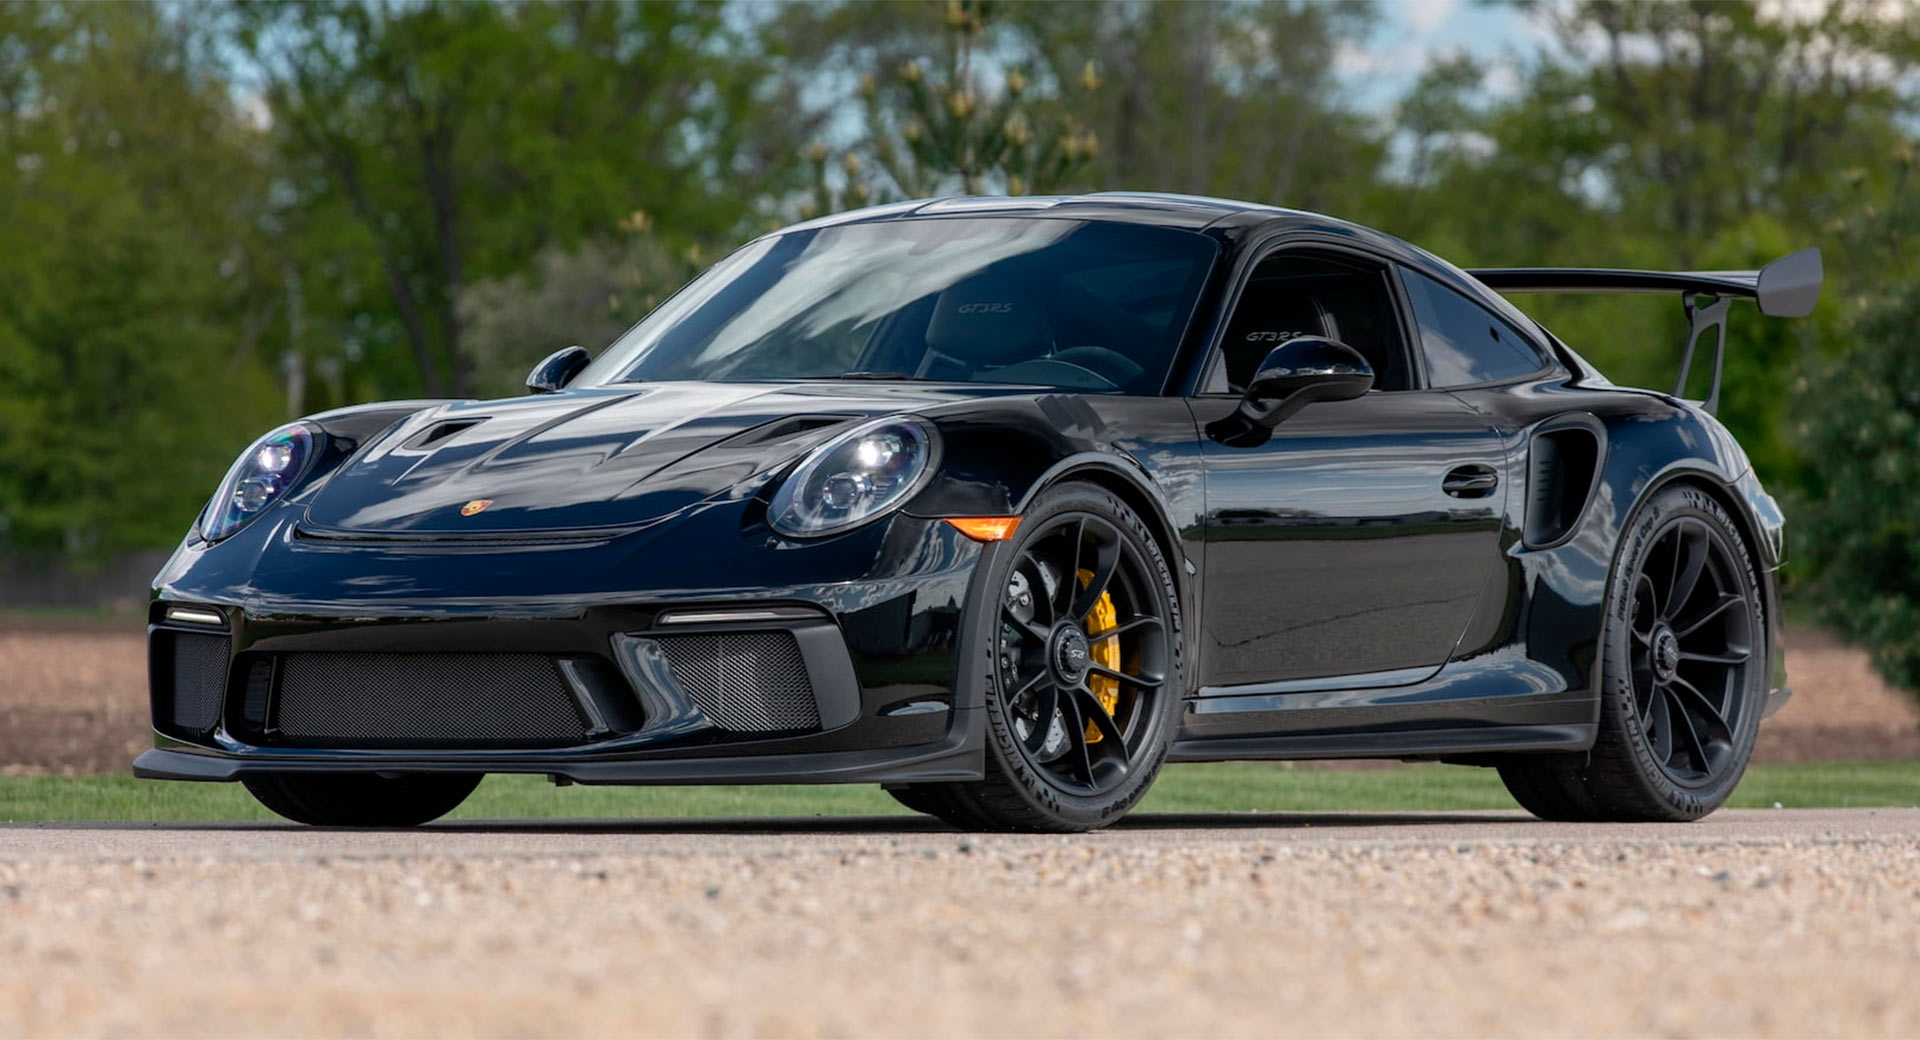 Blacked Out 2019 Porsche 911 GT3 RS Is A Lethal Weapon Begging To Be Driven